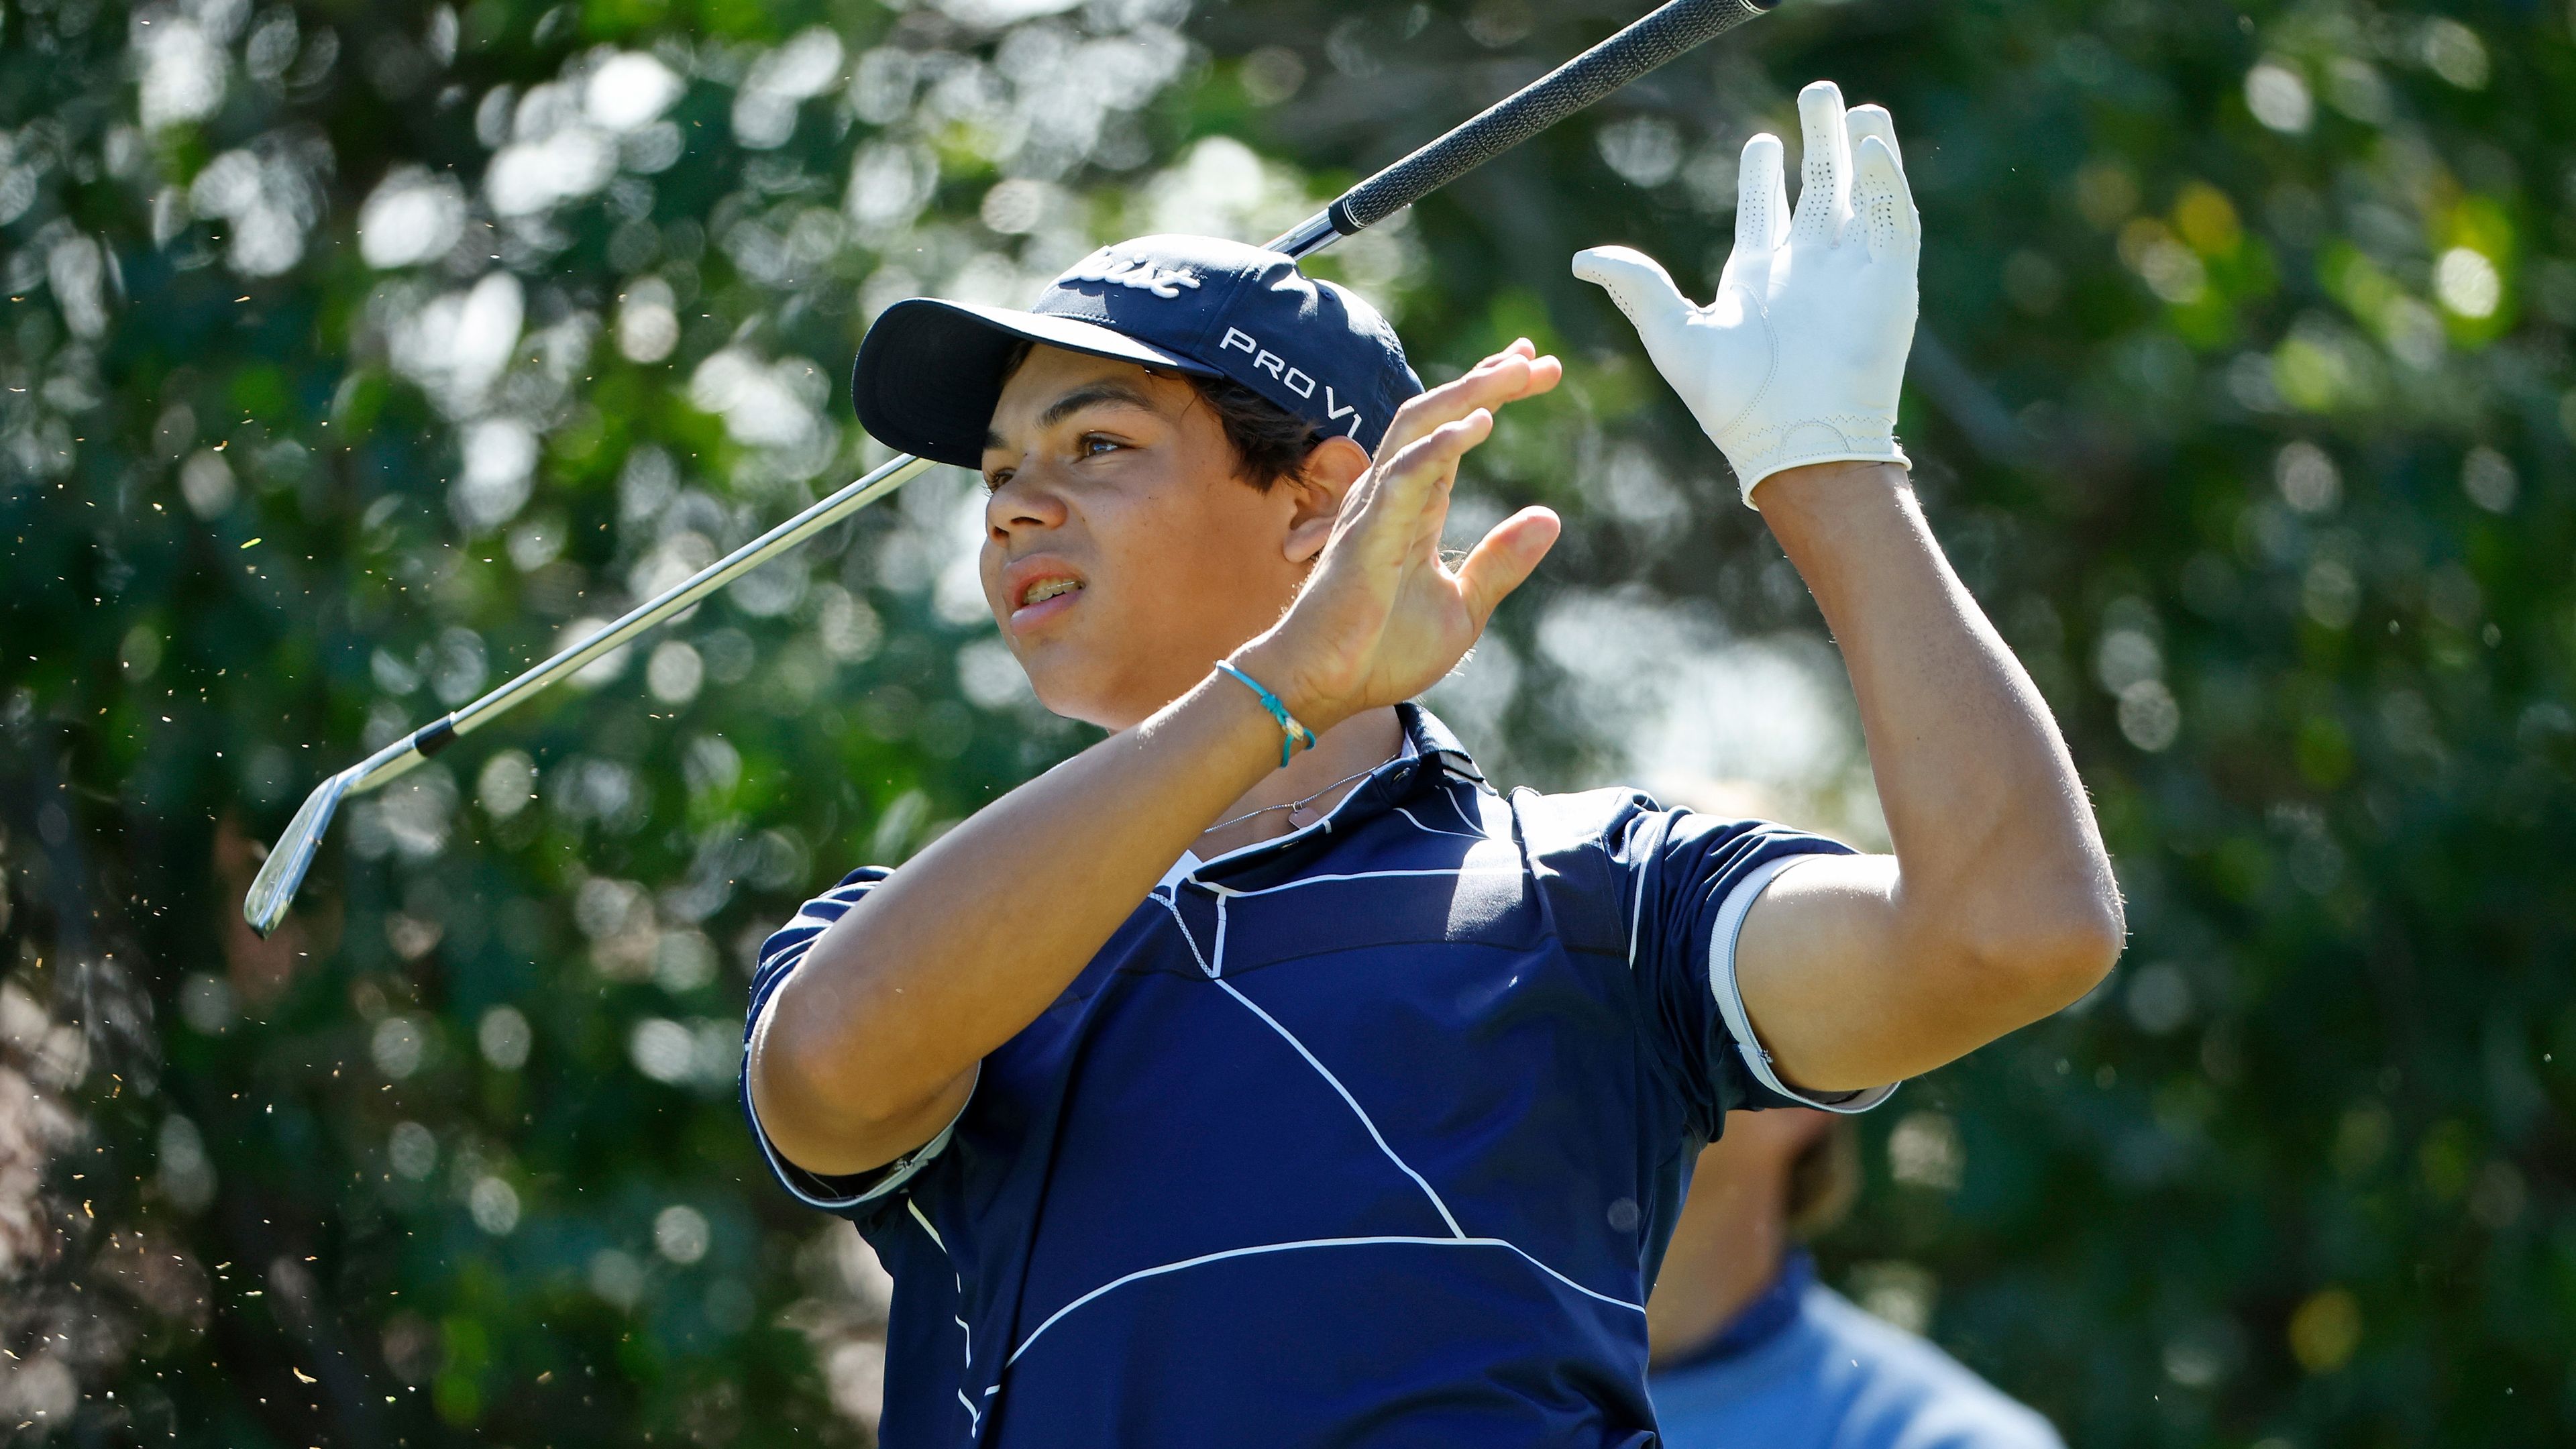 Charlie Woods, teen son of Tiger, shoots 86 in horror first PGA Tour qualifying event